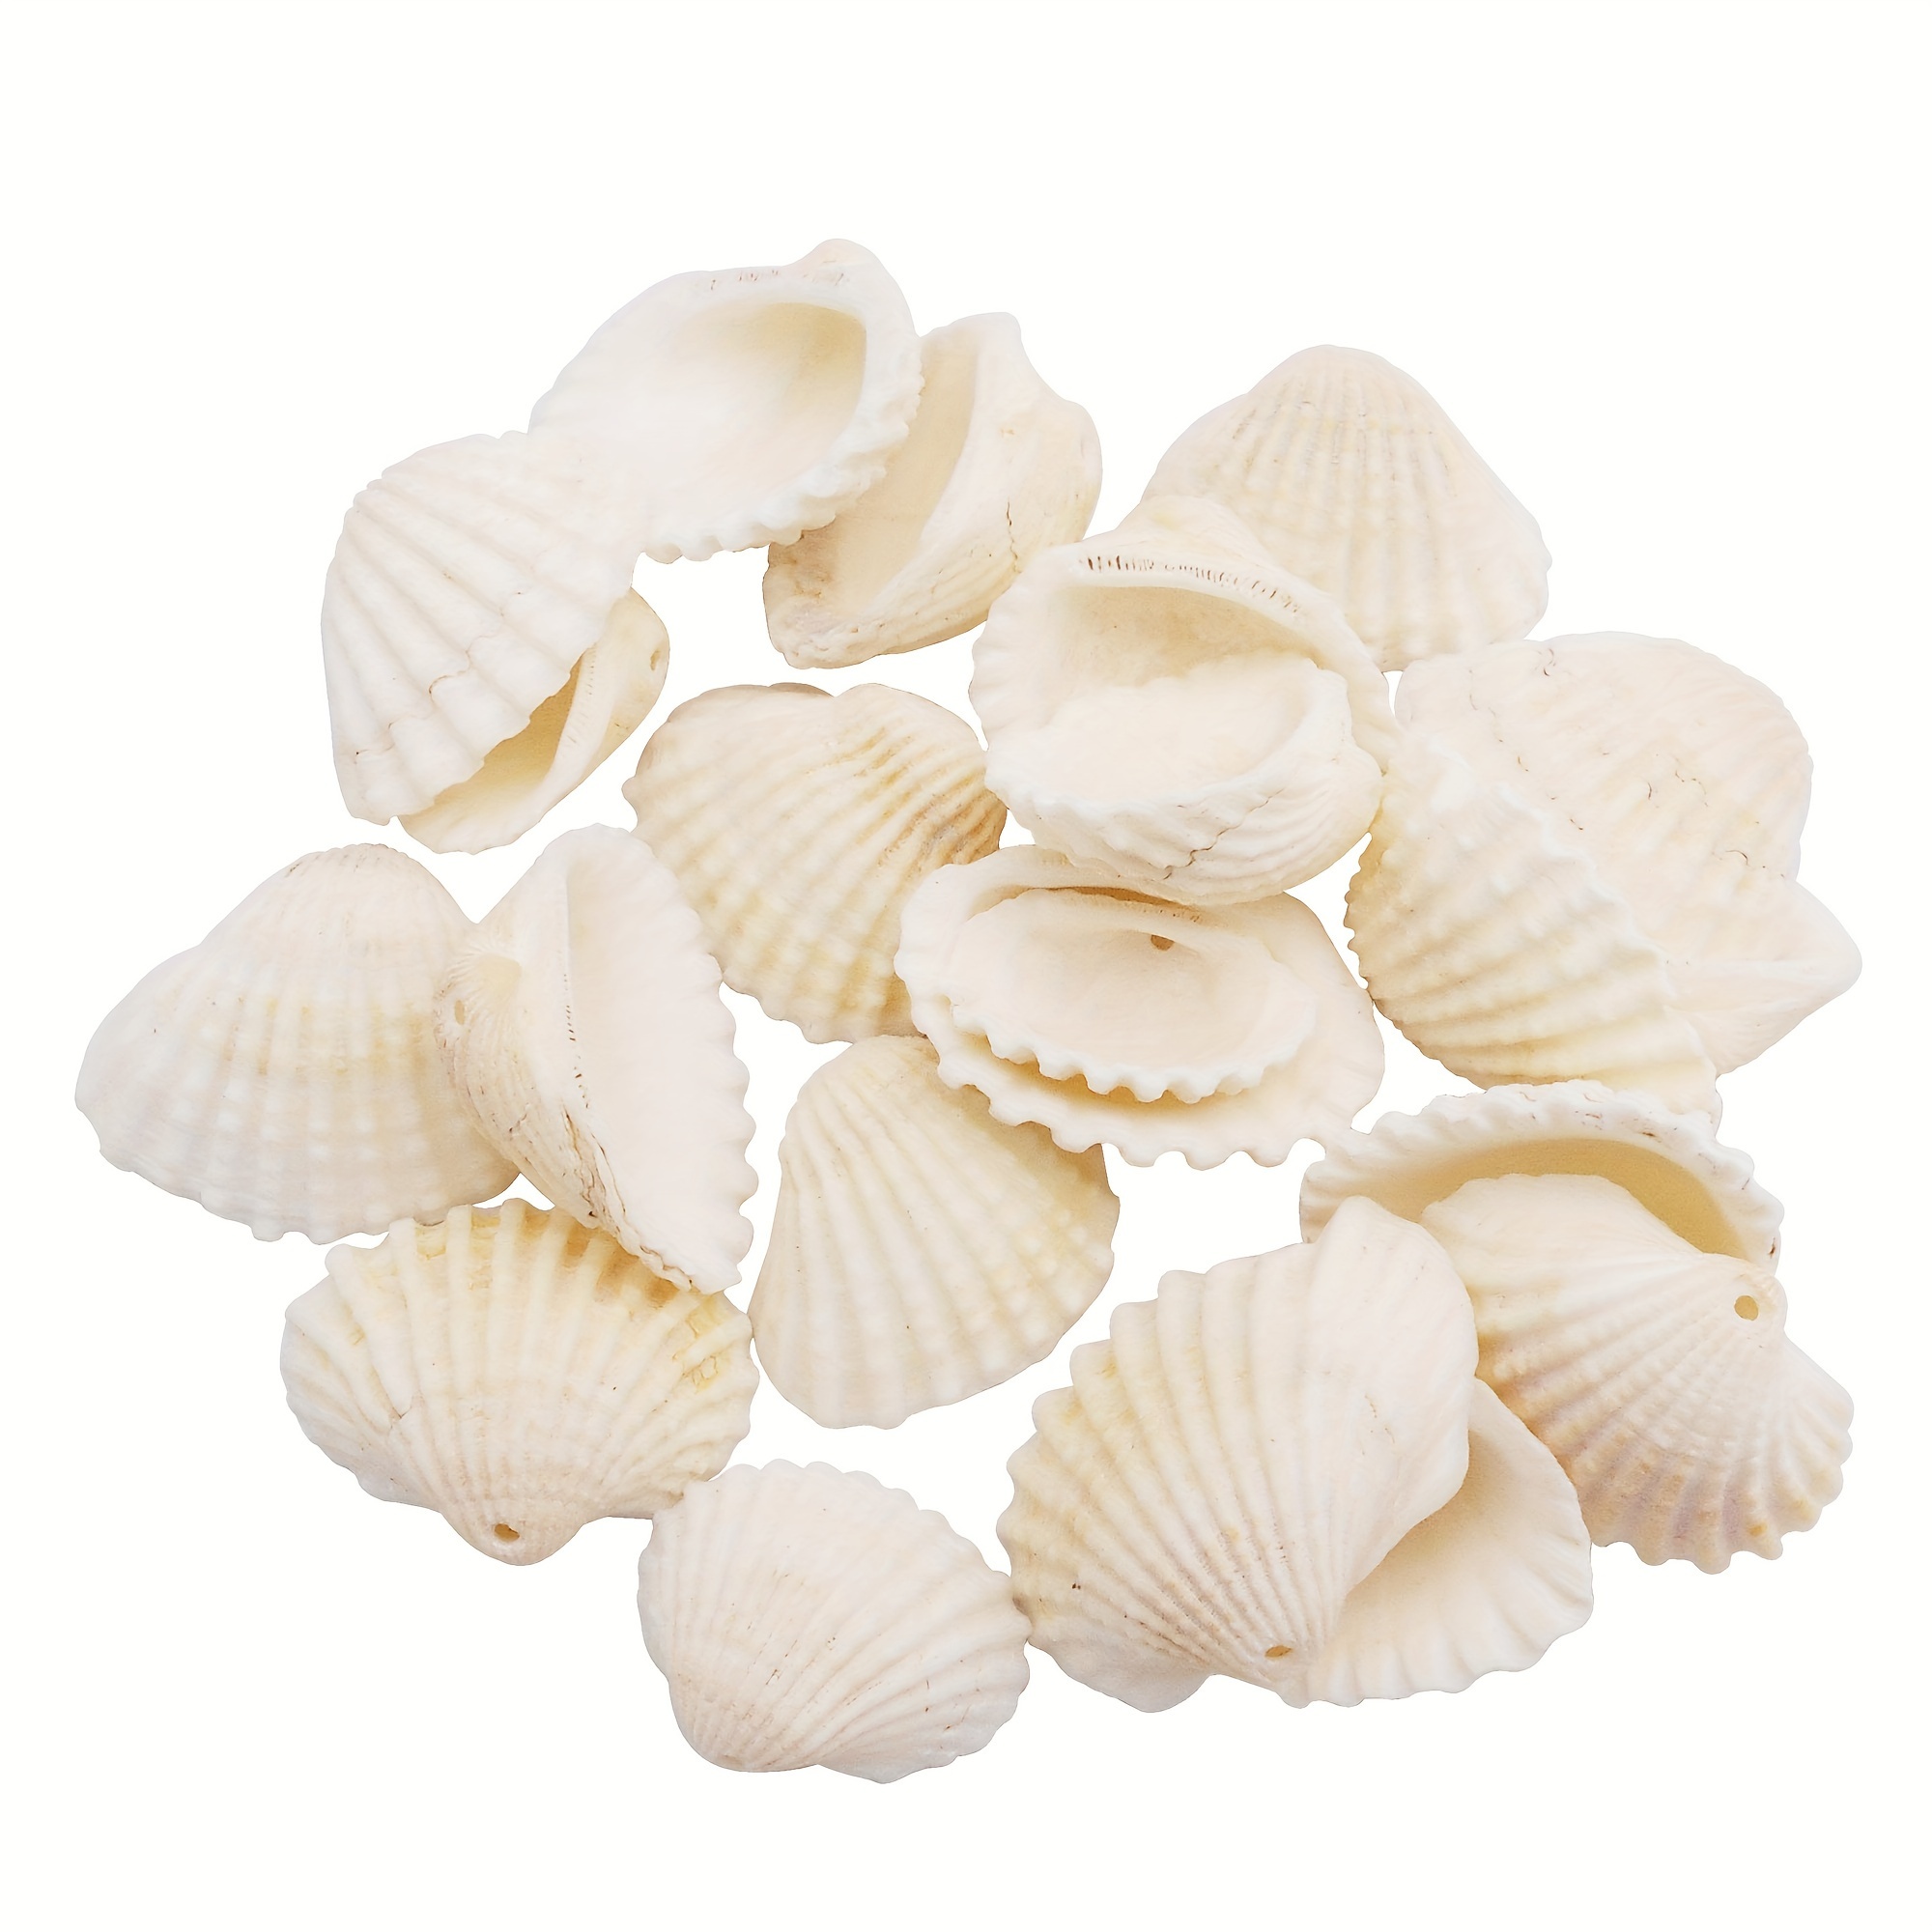 

40pcs Natural Conch Shell Beads Drilled Tiny Scallop Seashells Ocean Beach Seashells Craft Charms For Jewelry Making Candle Diy Home Decoration Party Wedding Decor